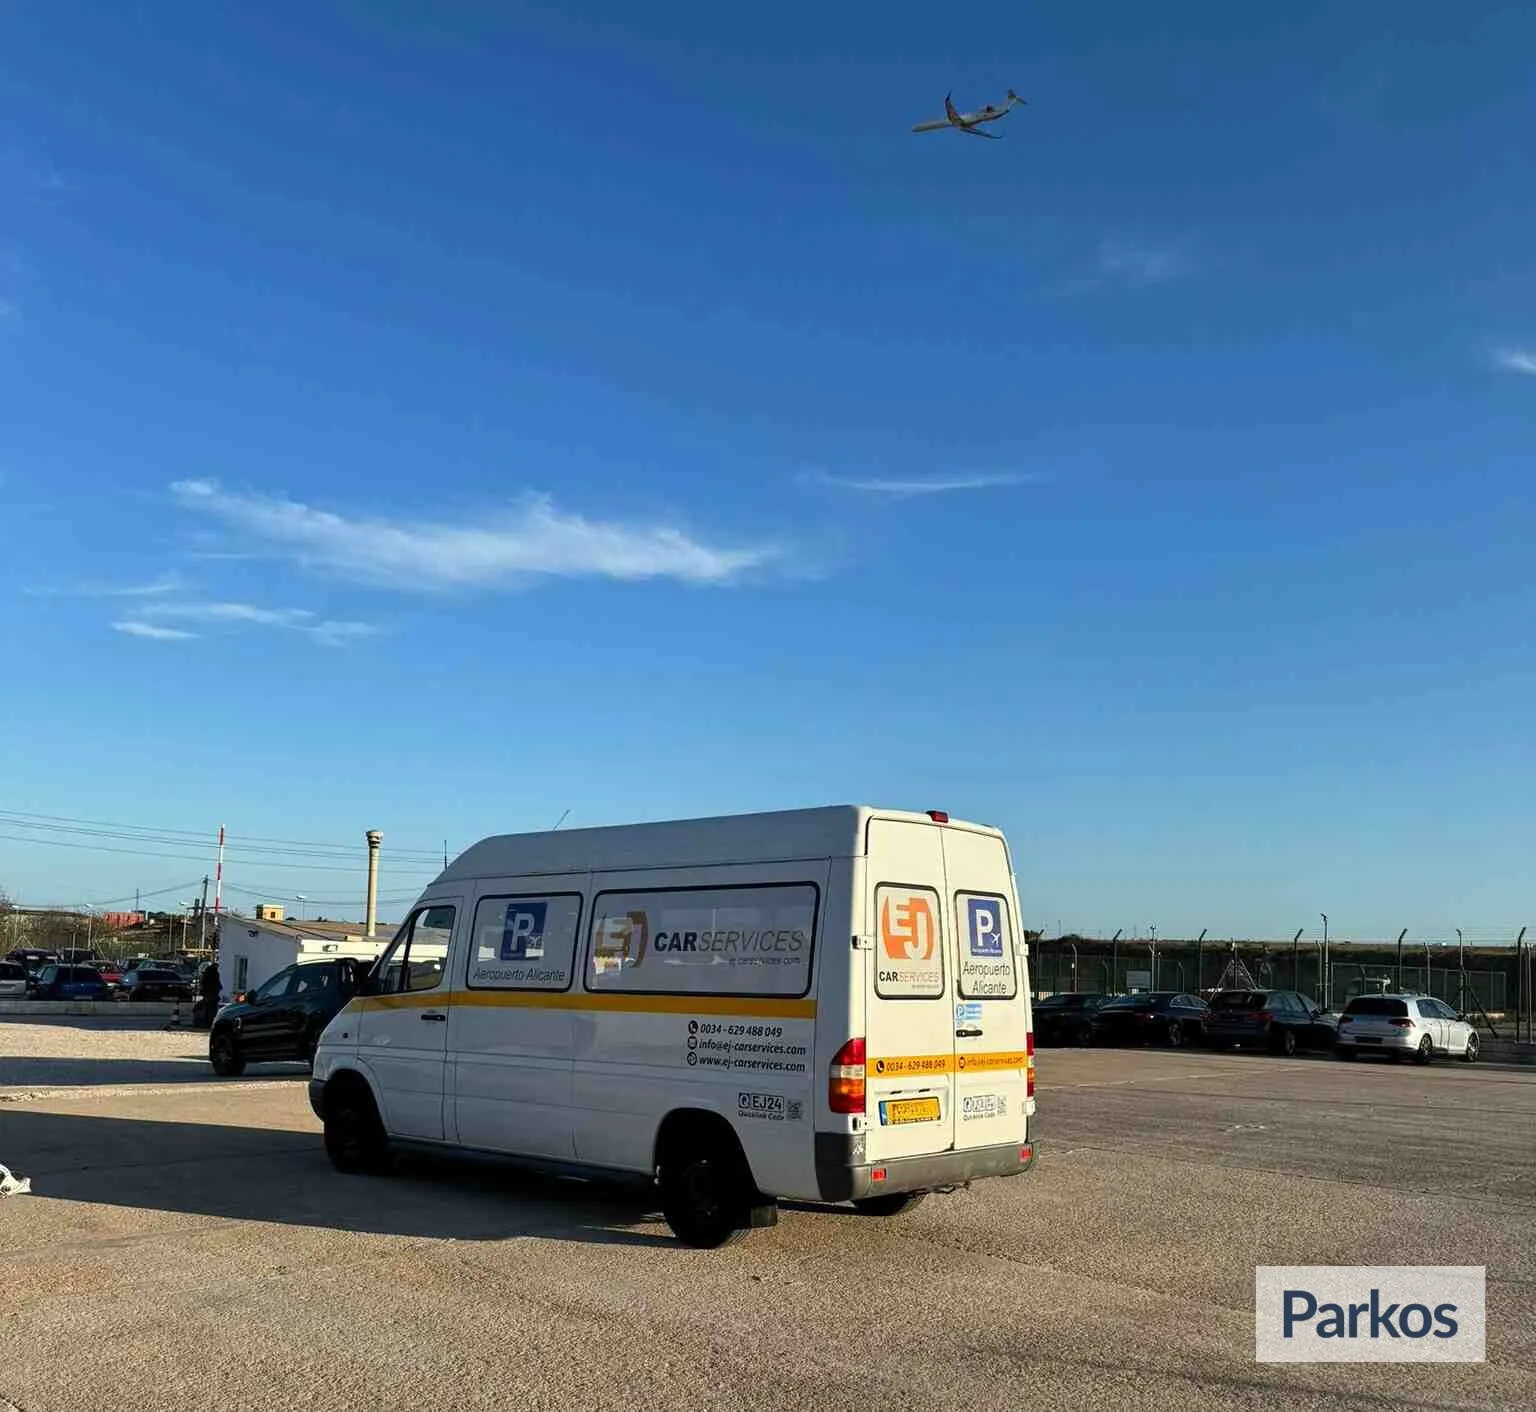 EJ Carservices - Alicante Airport Parking - picture 1